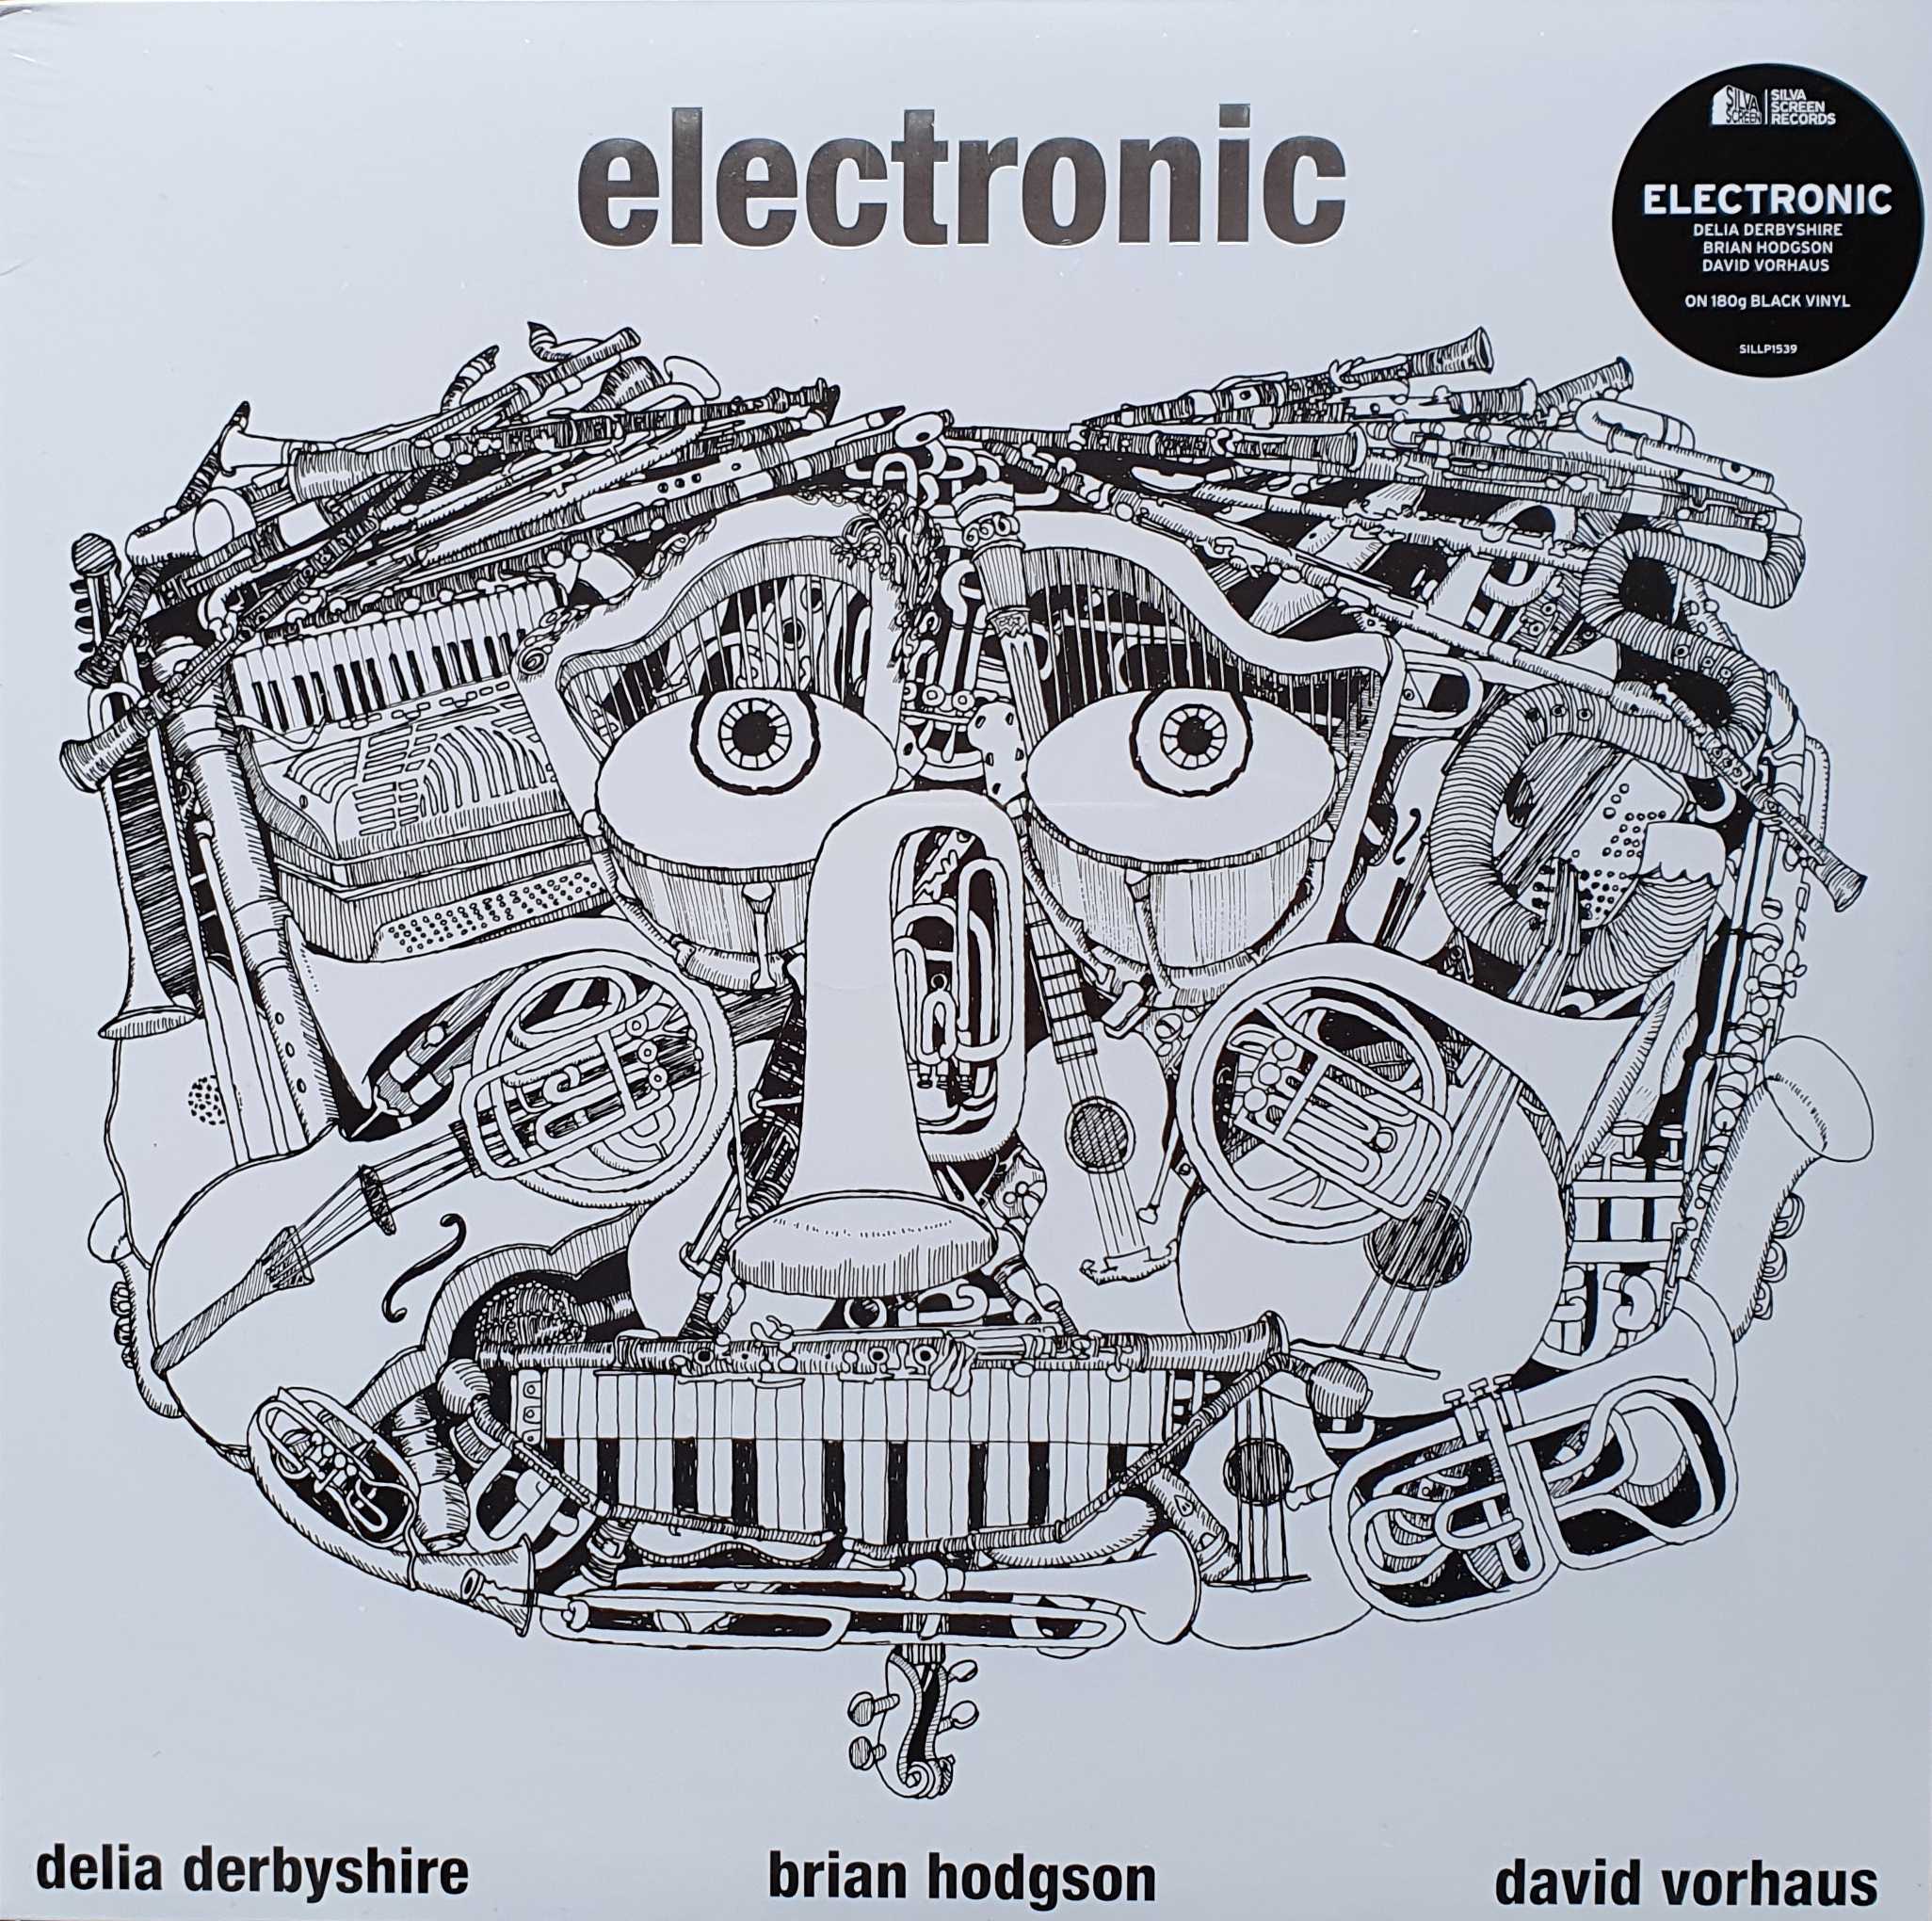 Picture of SILLP 1539 Electronic by artist Delia Derbyshire / Brian Hodgson / David Vorhaus from the BBC albums - Records and Tapes library